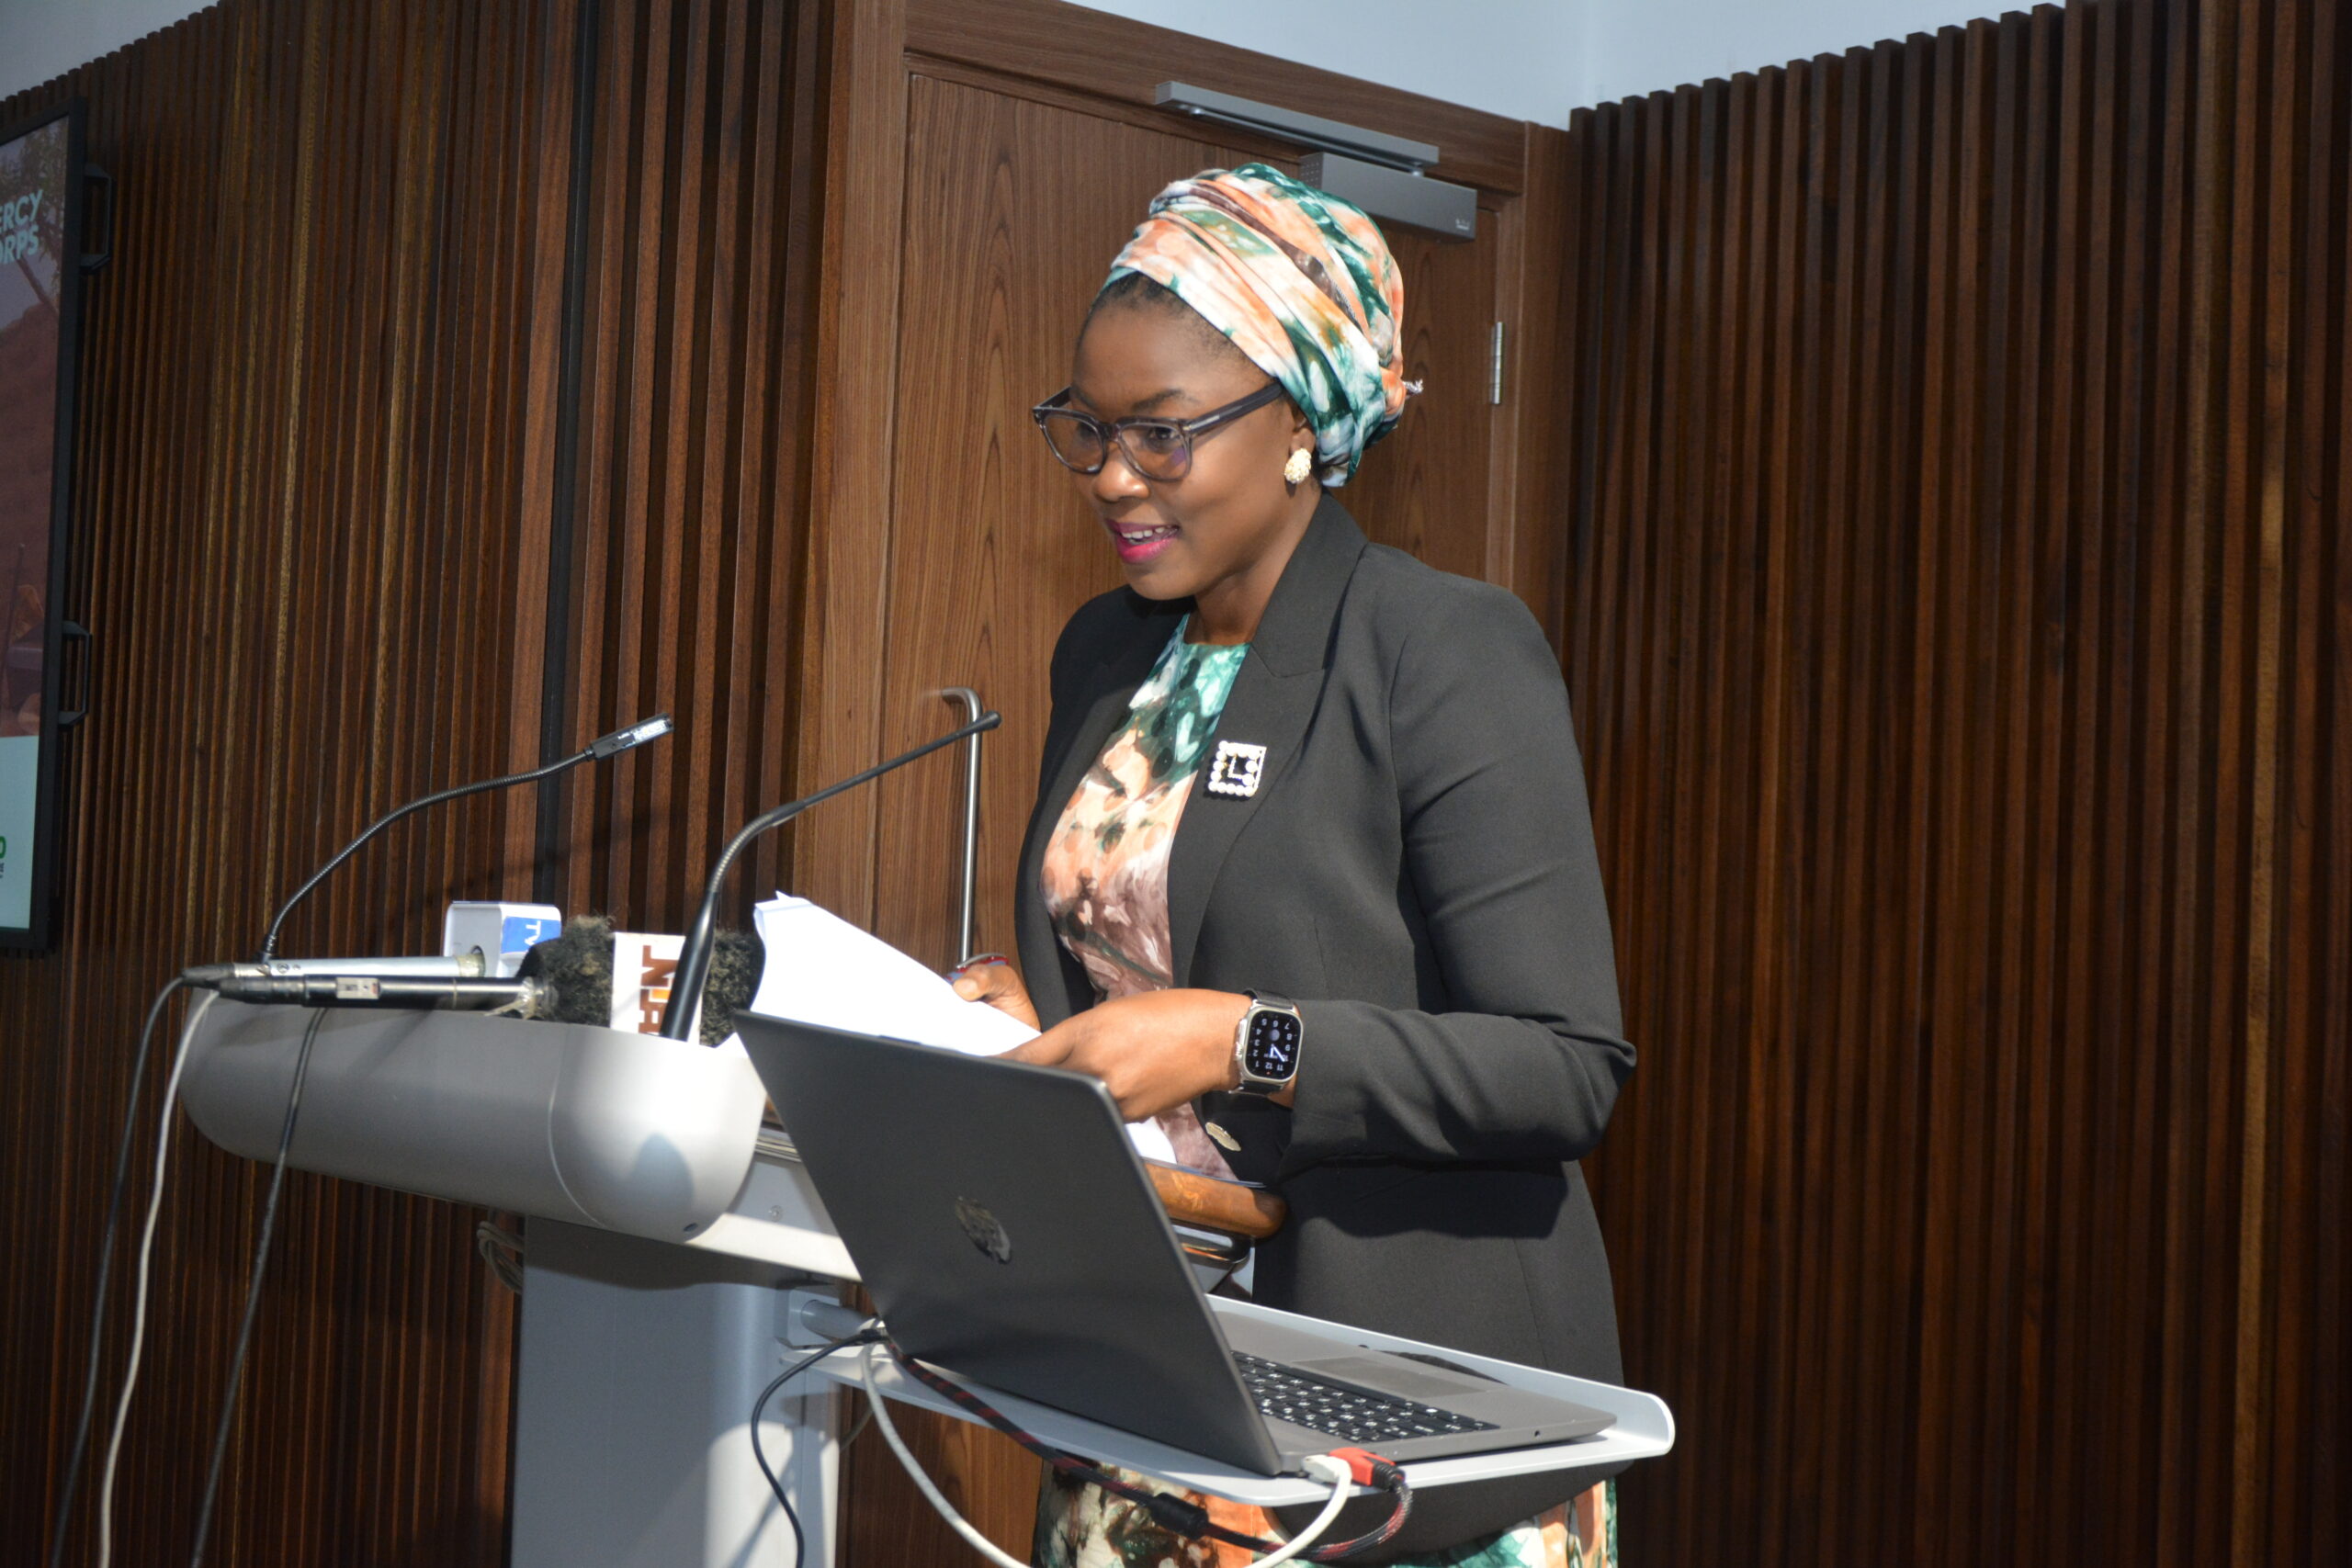 Hon. Minister of Youth Development, Dr Jamila Bio Ibrahim at the event.